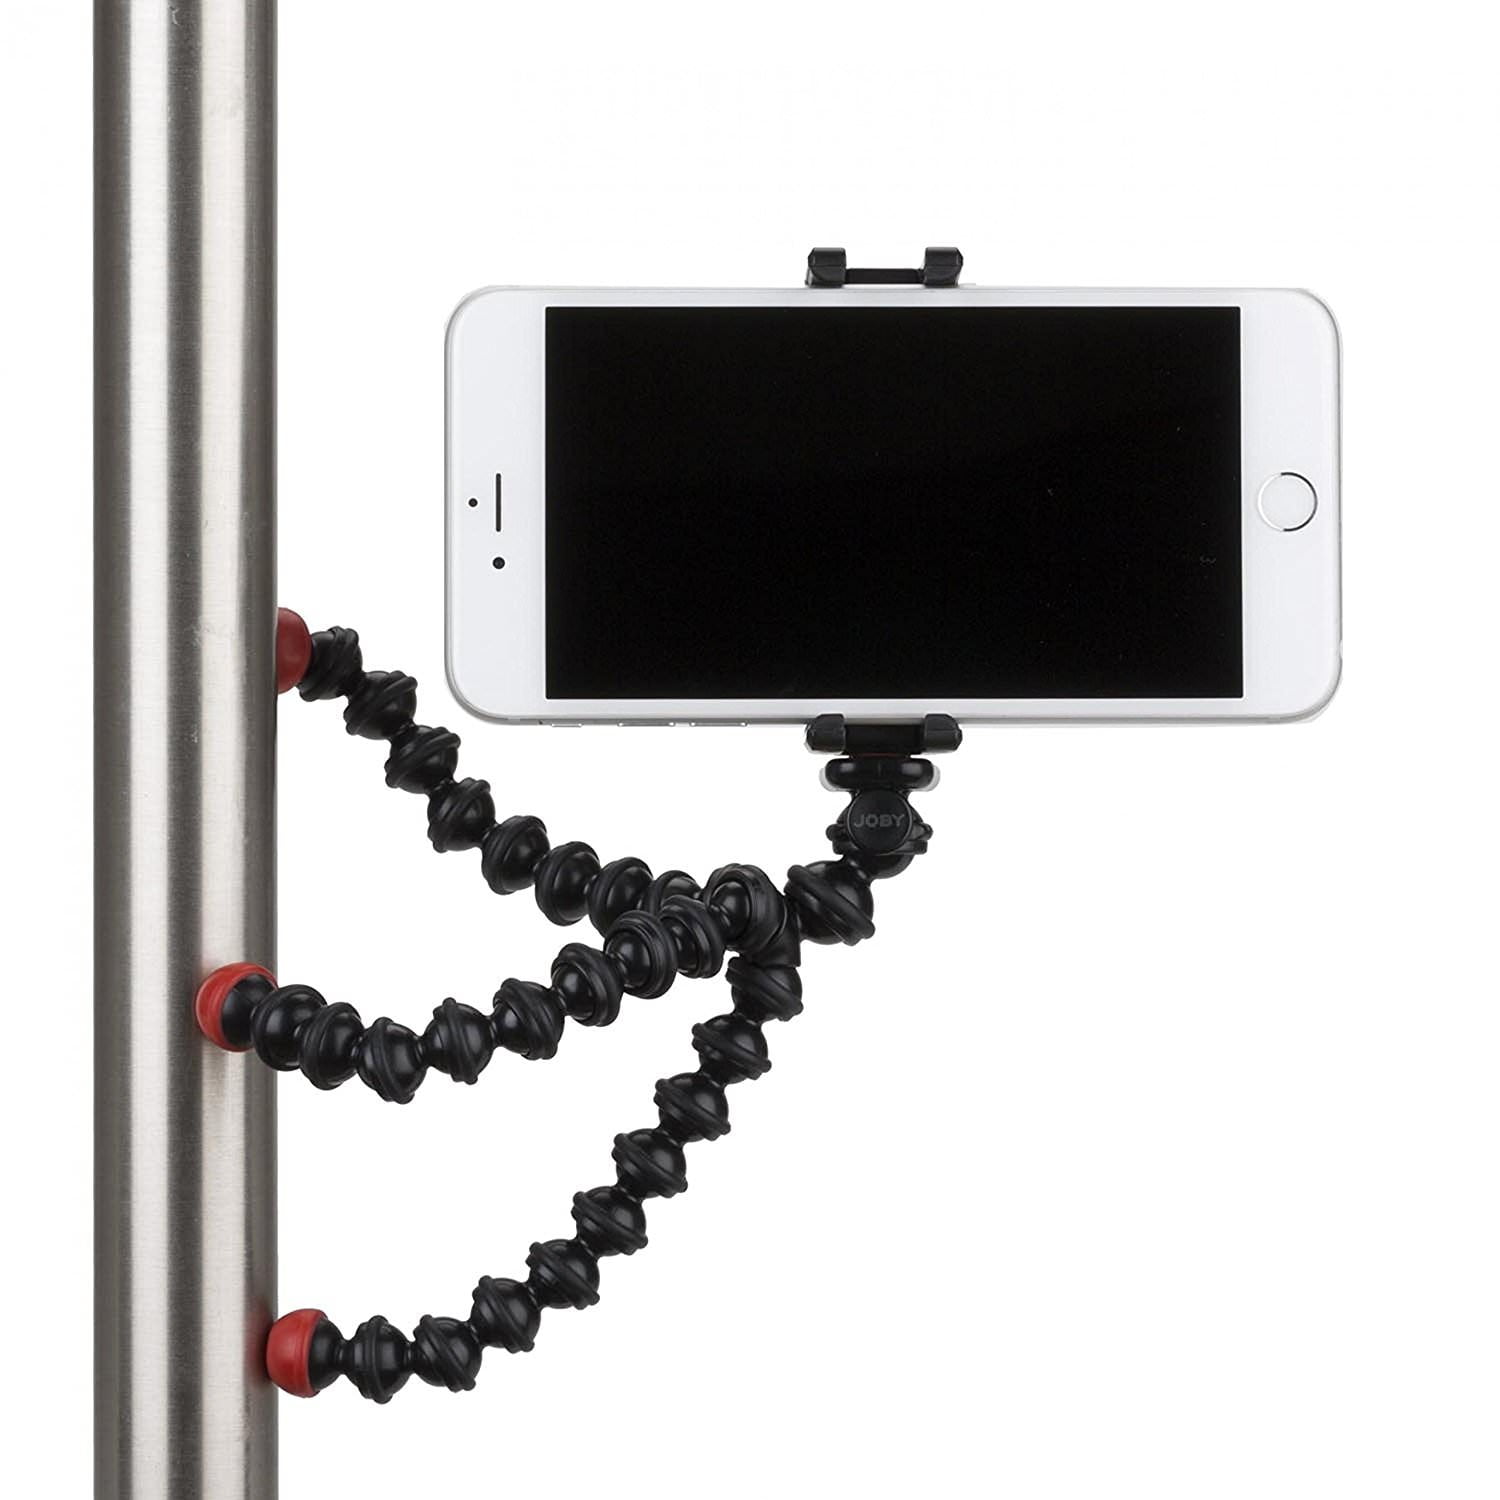 Mount and Flexible Tripod for Smartphones... JOBY GripTight GorillaPod Magnetic 